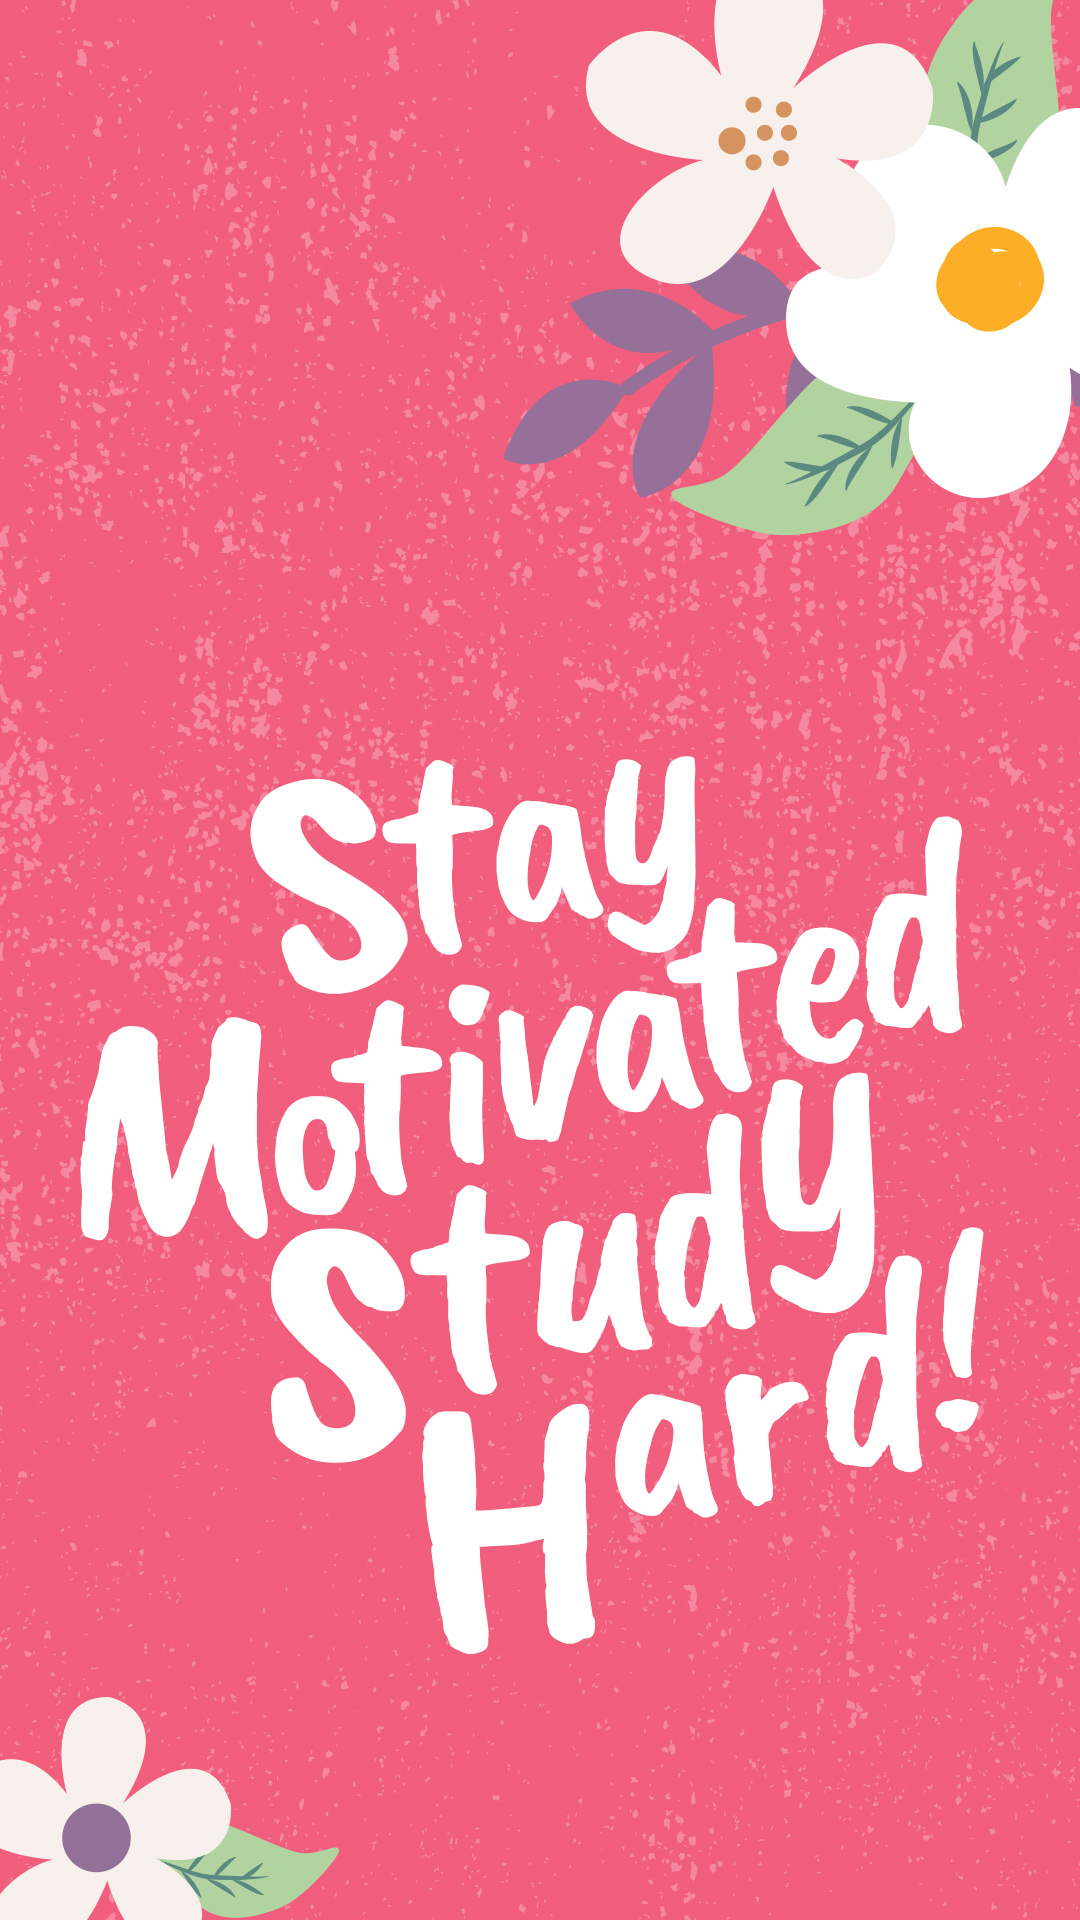 Stay Motivated Study Hard - 1080x1920 Wallpaper 